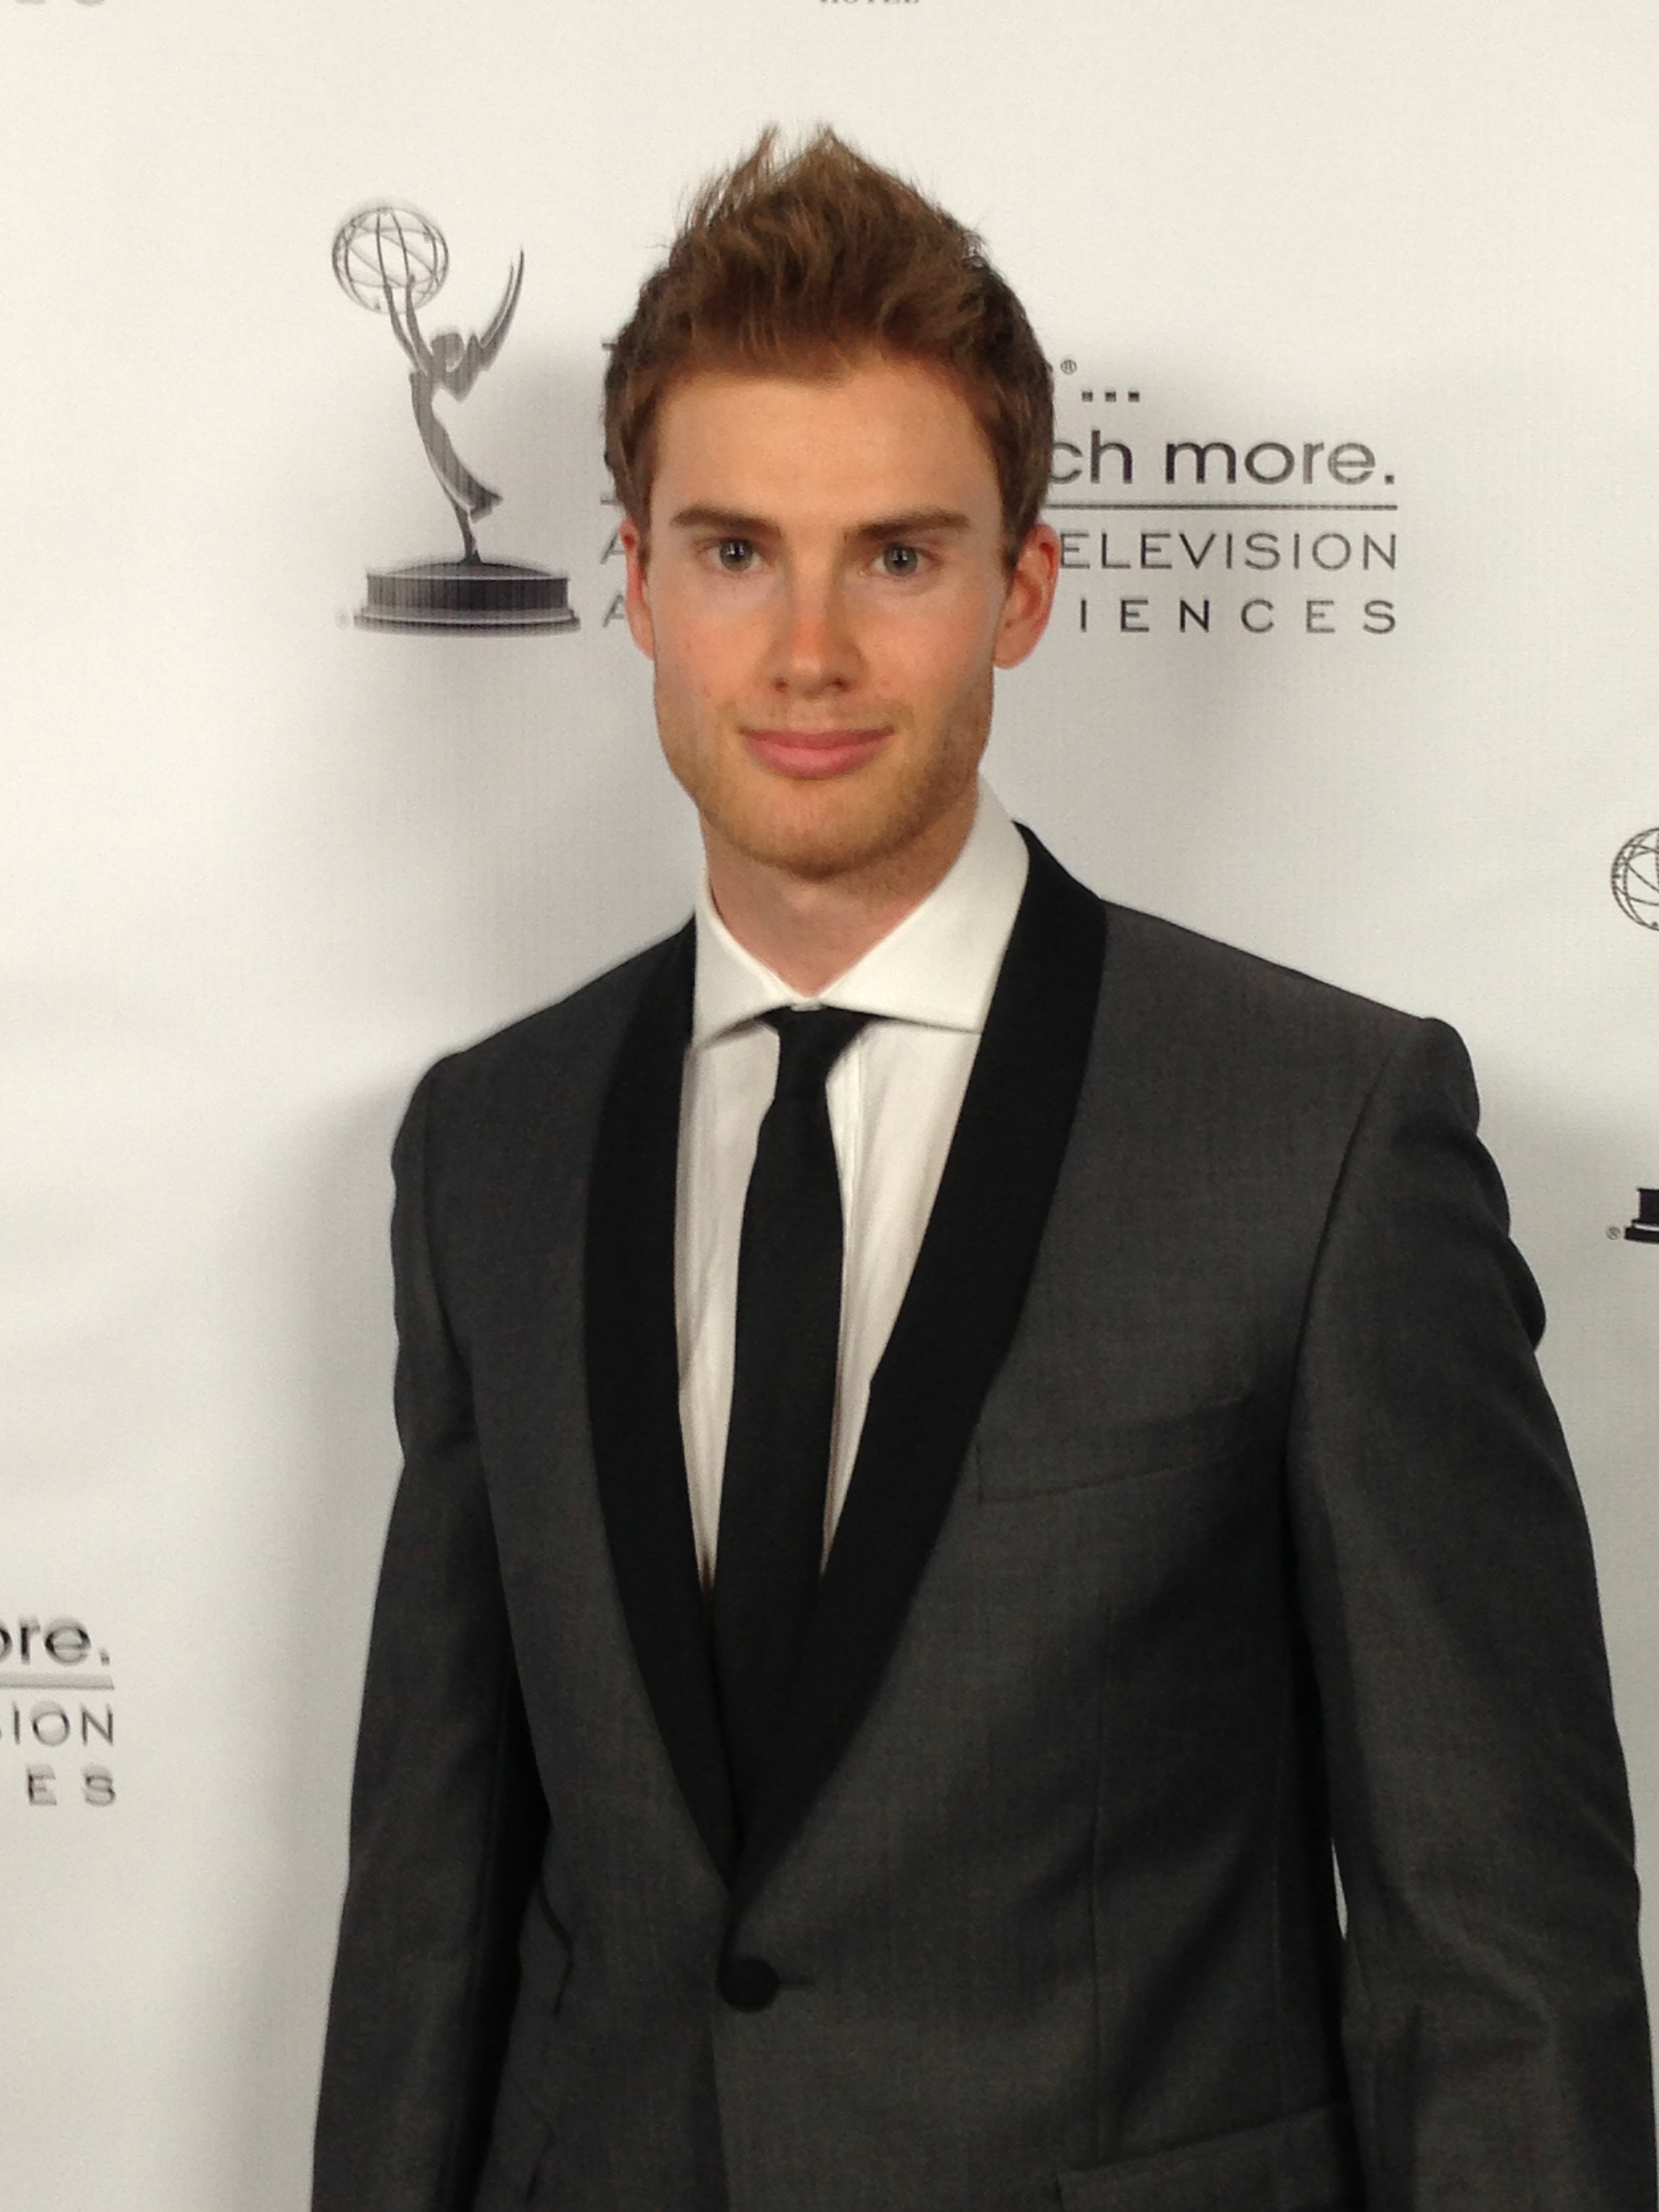 Ed Coupland at the 2013 Emmys